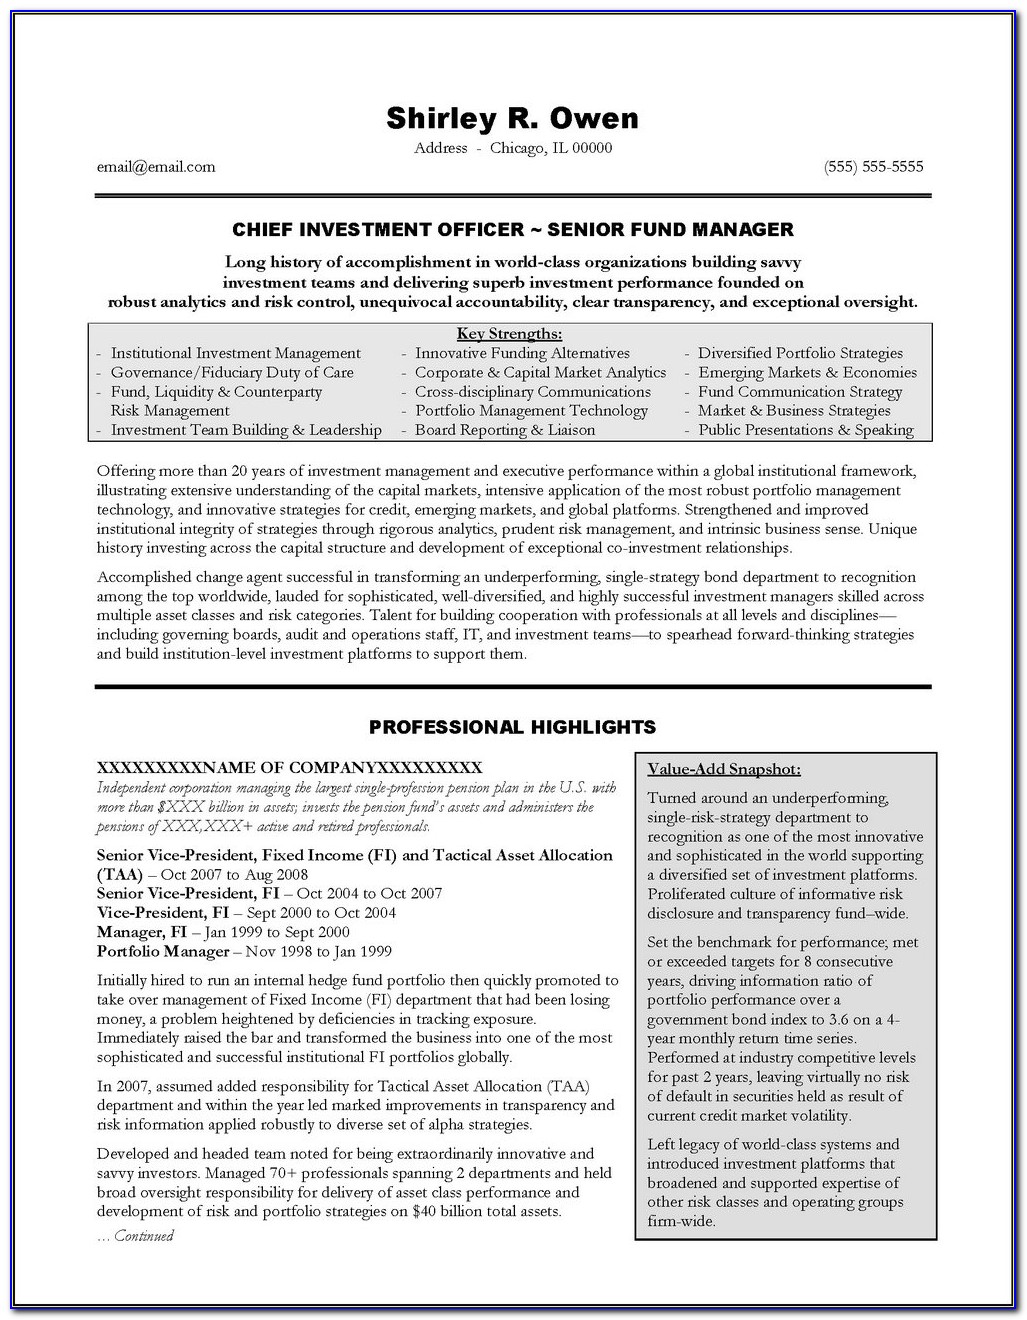 Resume Templates For Hr Executives